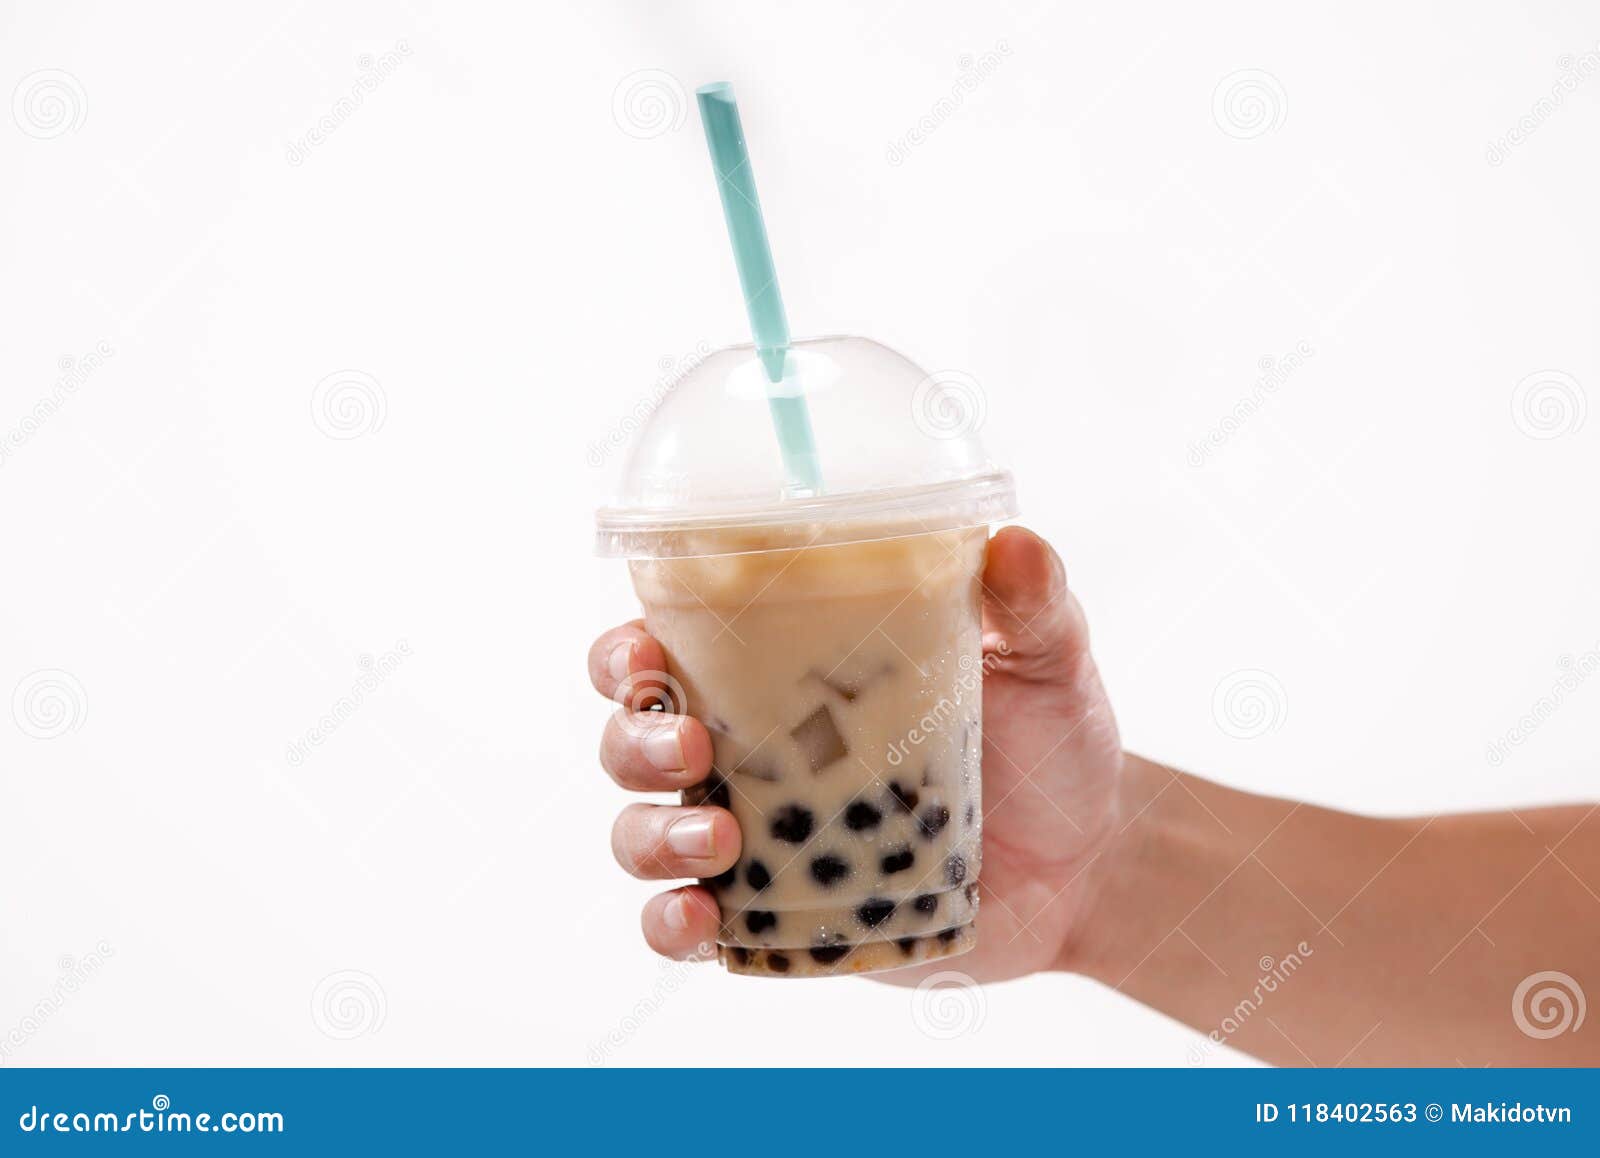 Ice Coffee In Plastic Cup Isolated On White Background Stock Photo, Picture  and Royalty Free Image. Image 14120724.